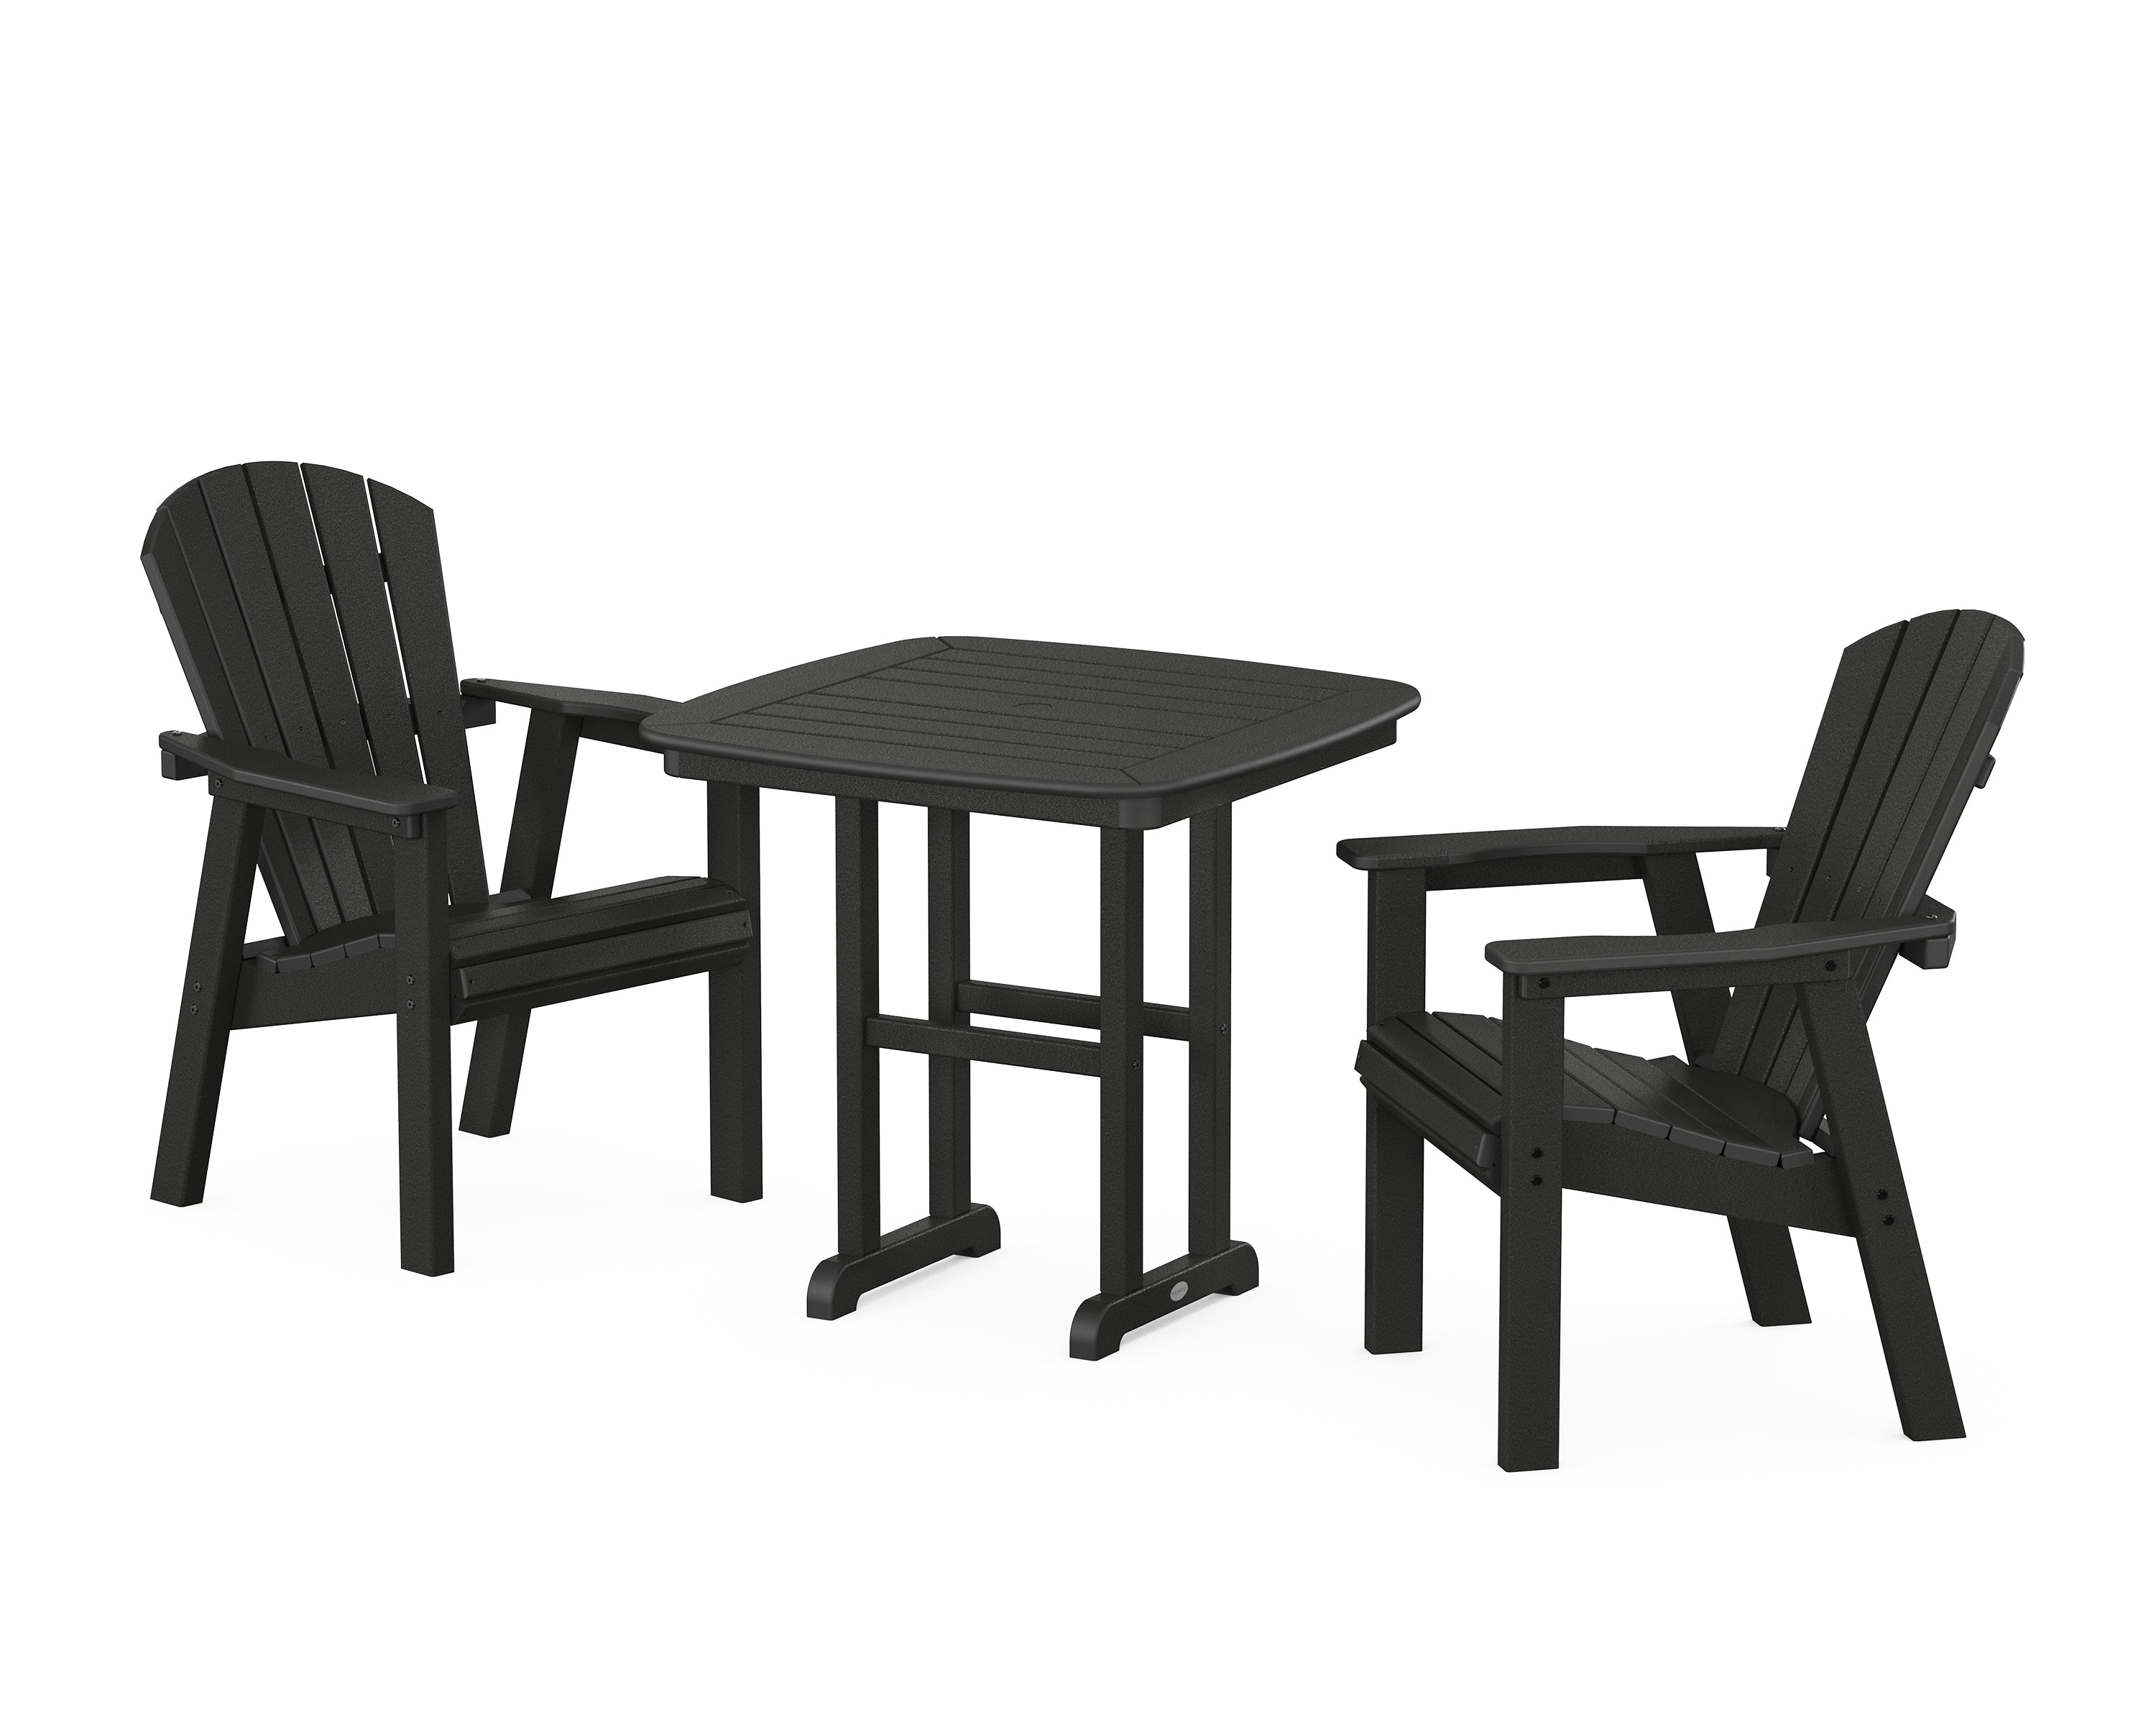 POLYWOOD® Seashell 3-Piece Dining Set in Black